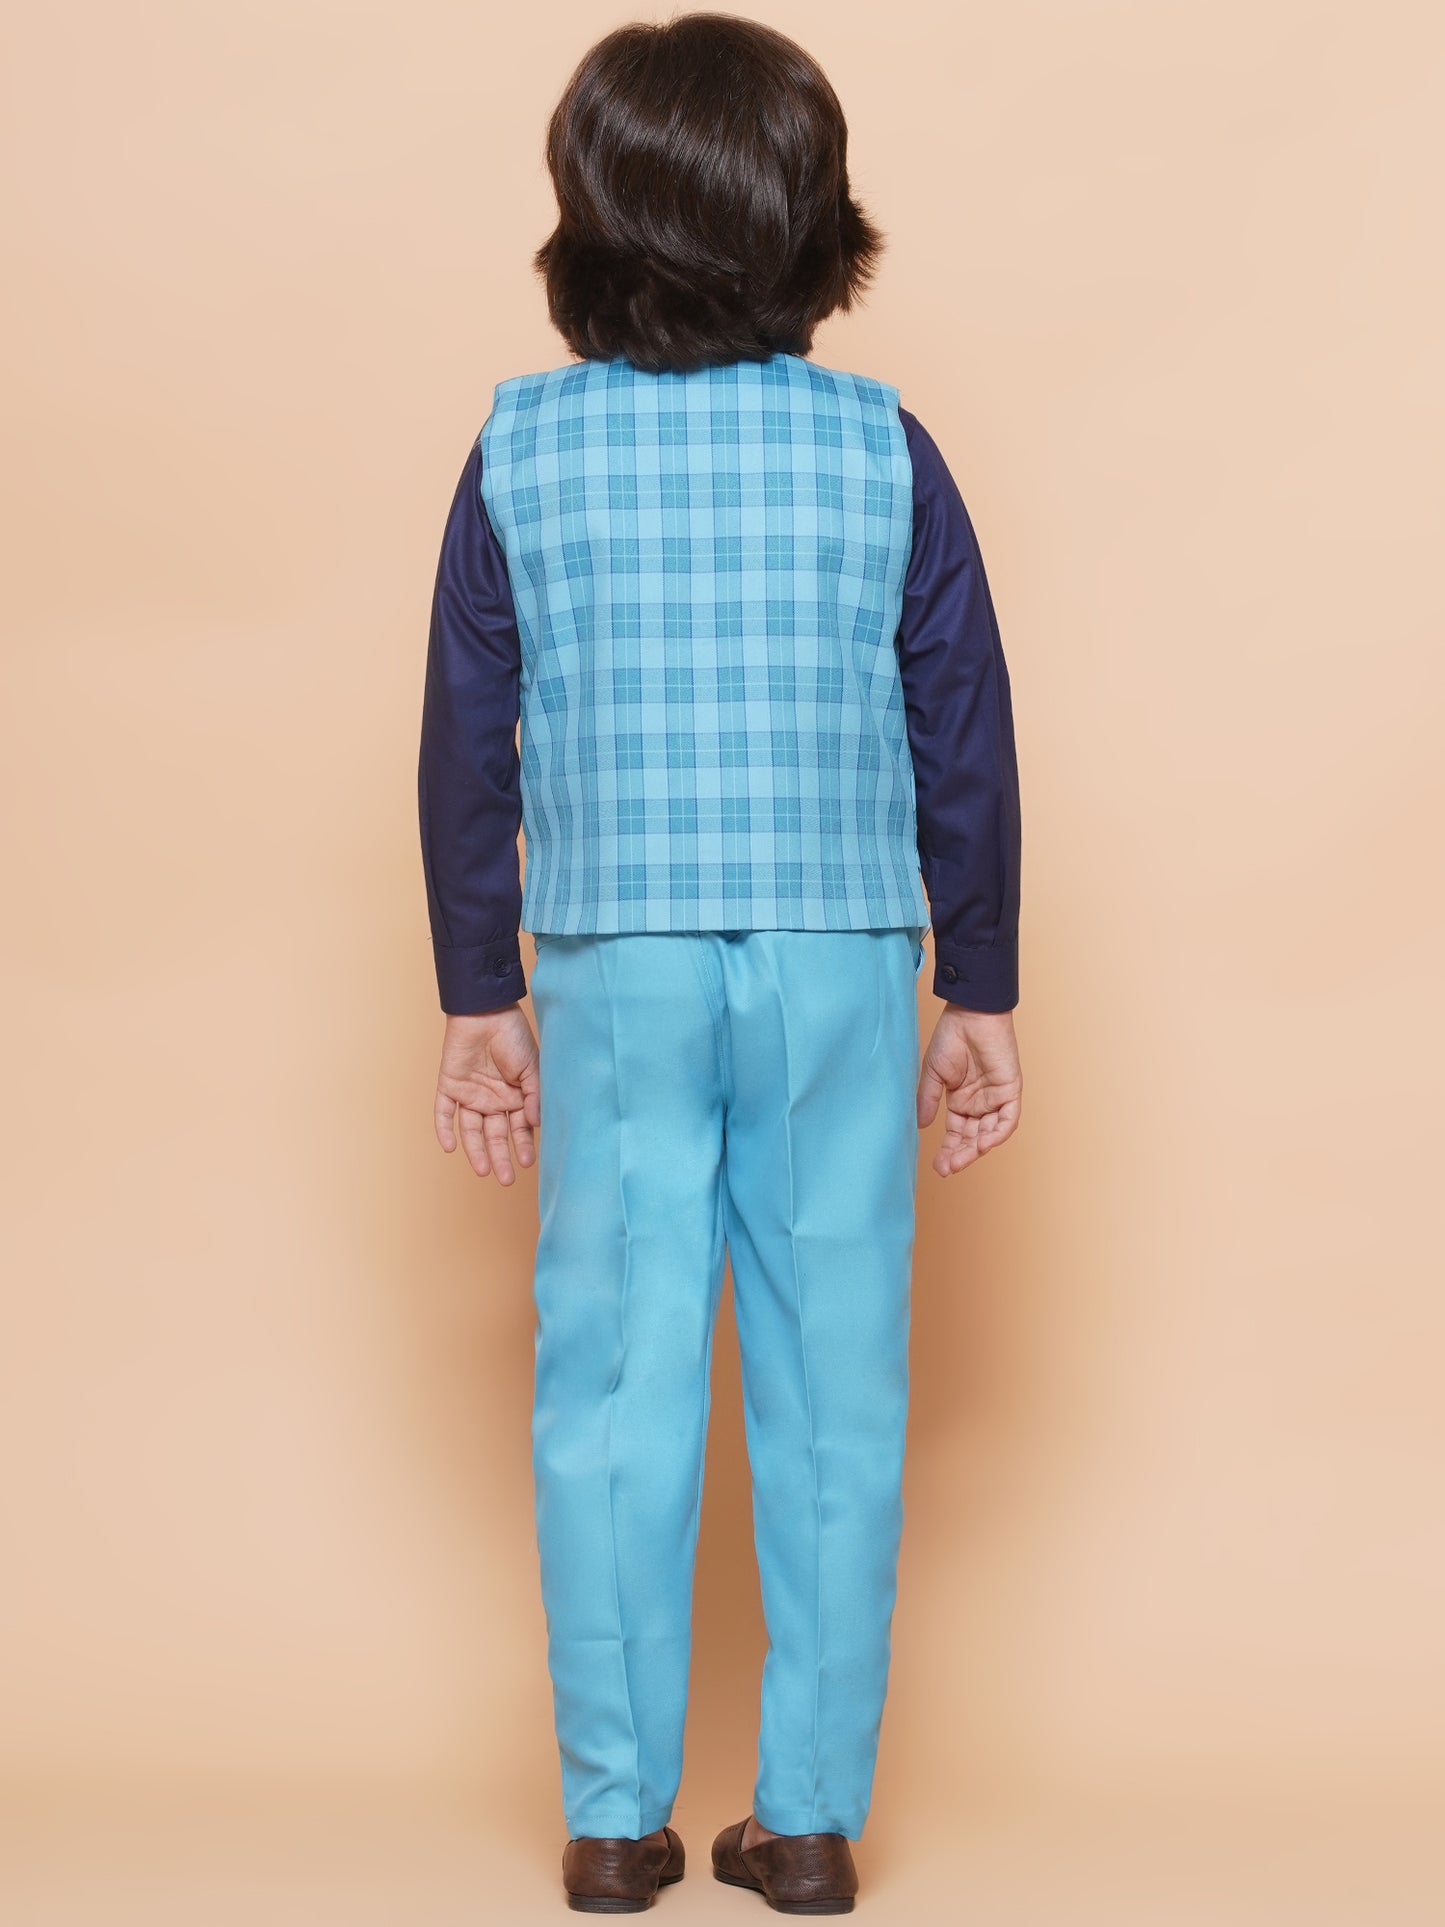 Kids Blue Suiting Fabric Checkered Suit Set For Boys